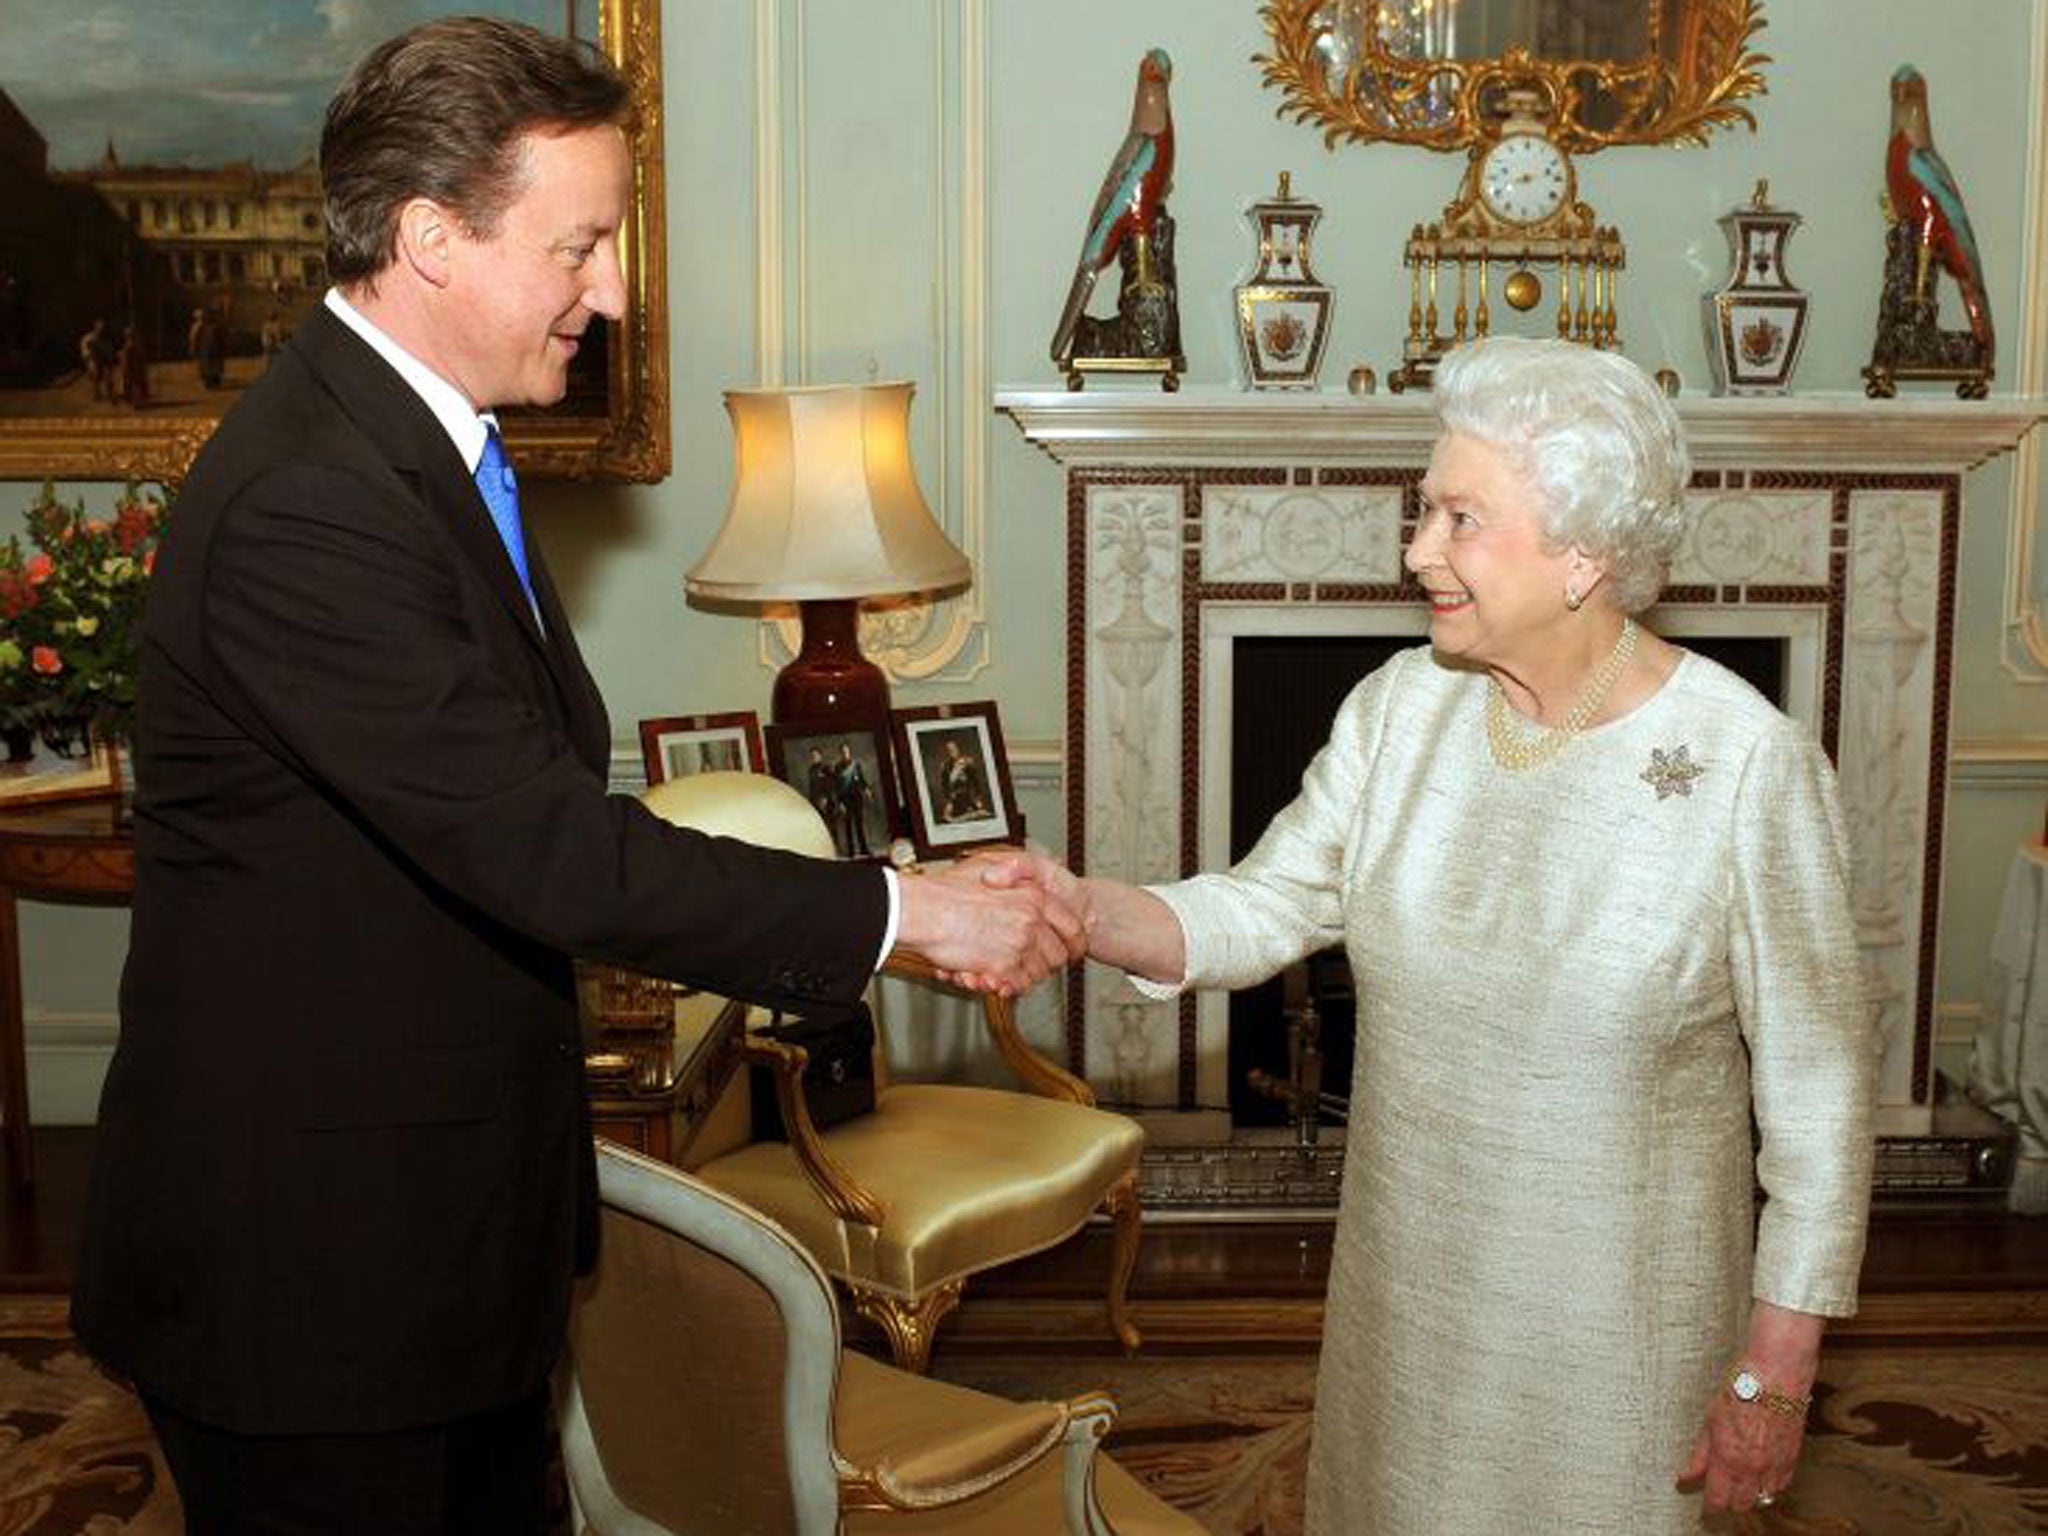 Royal audience: the Queen greets the new Prime Minister David Cameron in 2010 (PA)